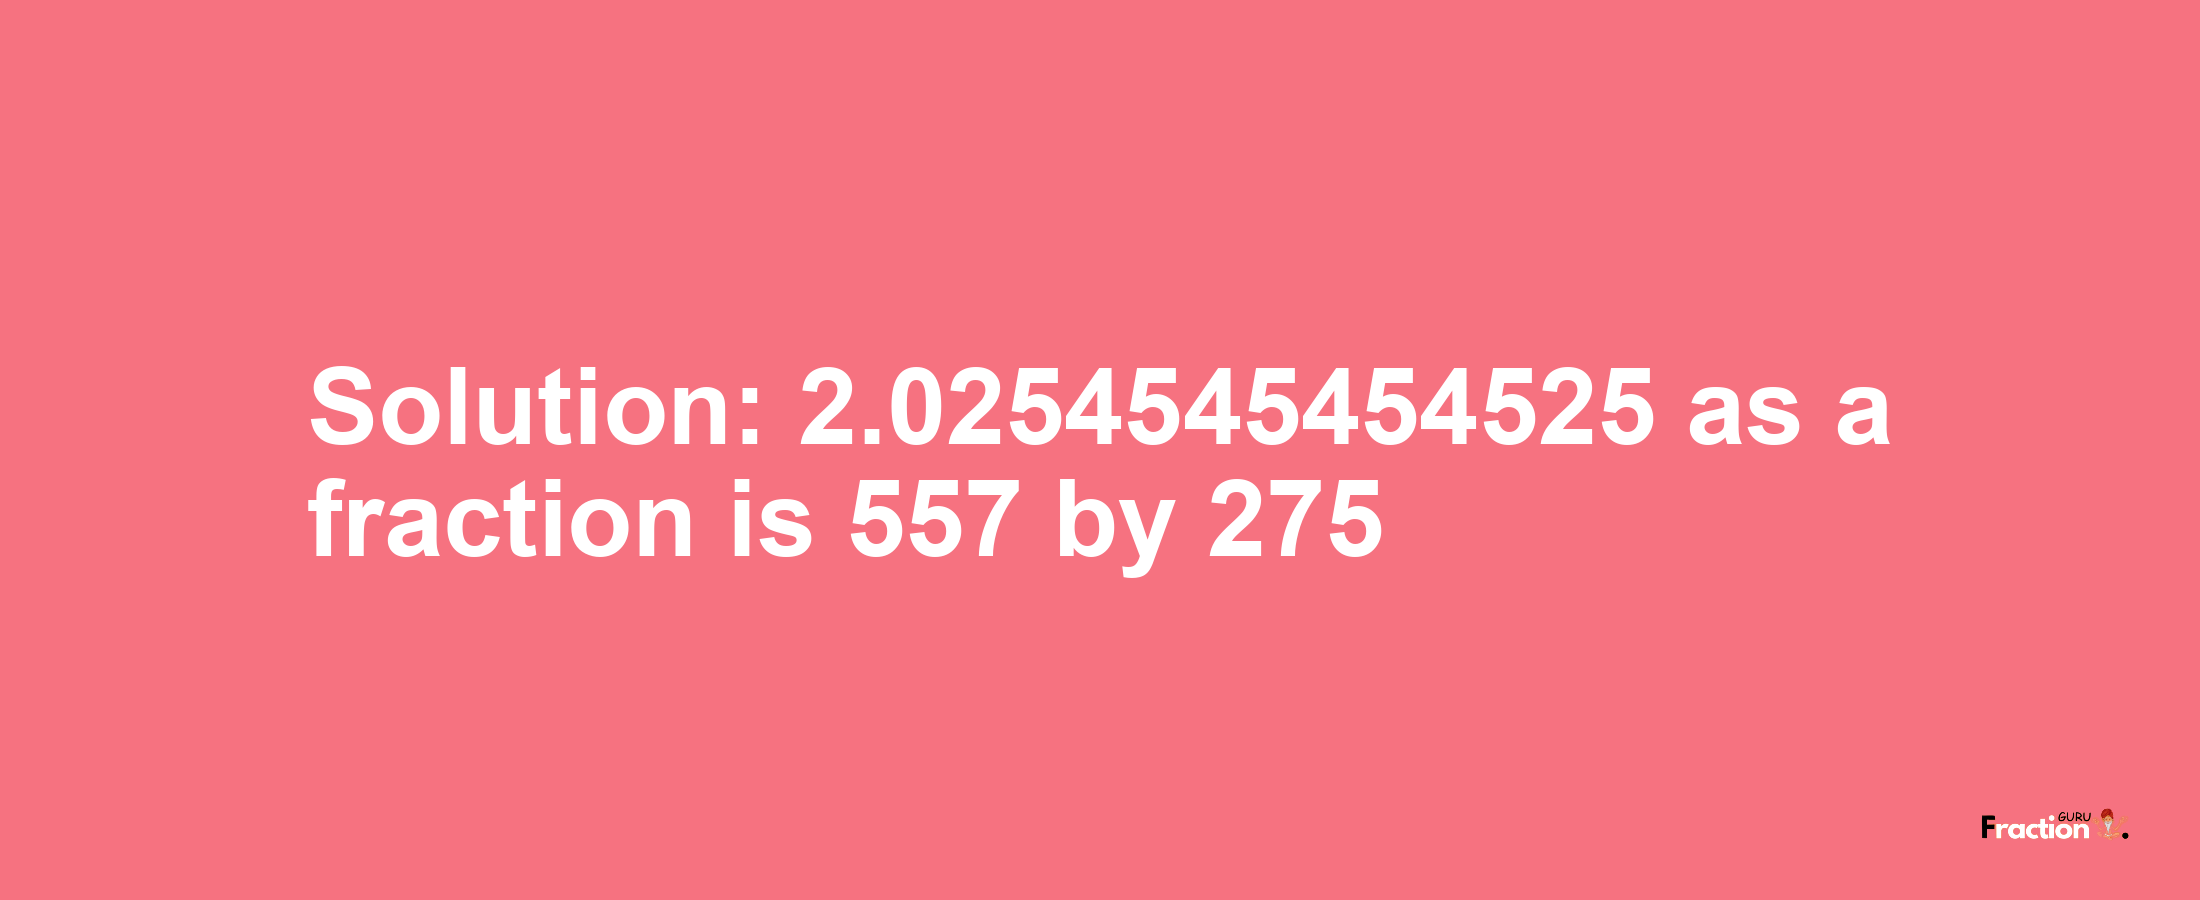 Solution:2.0254545454525 as a fraction is 557/275